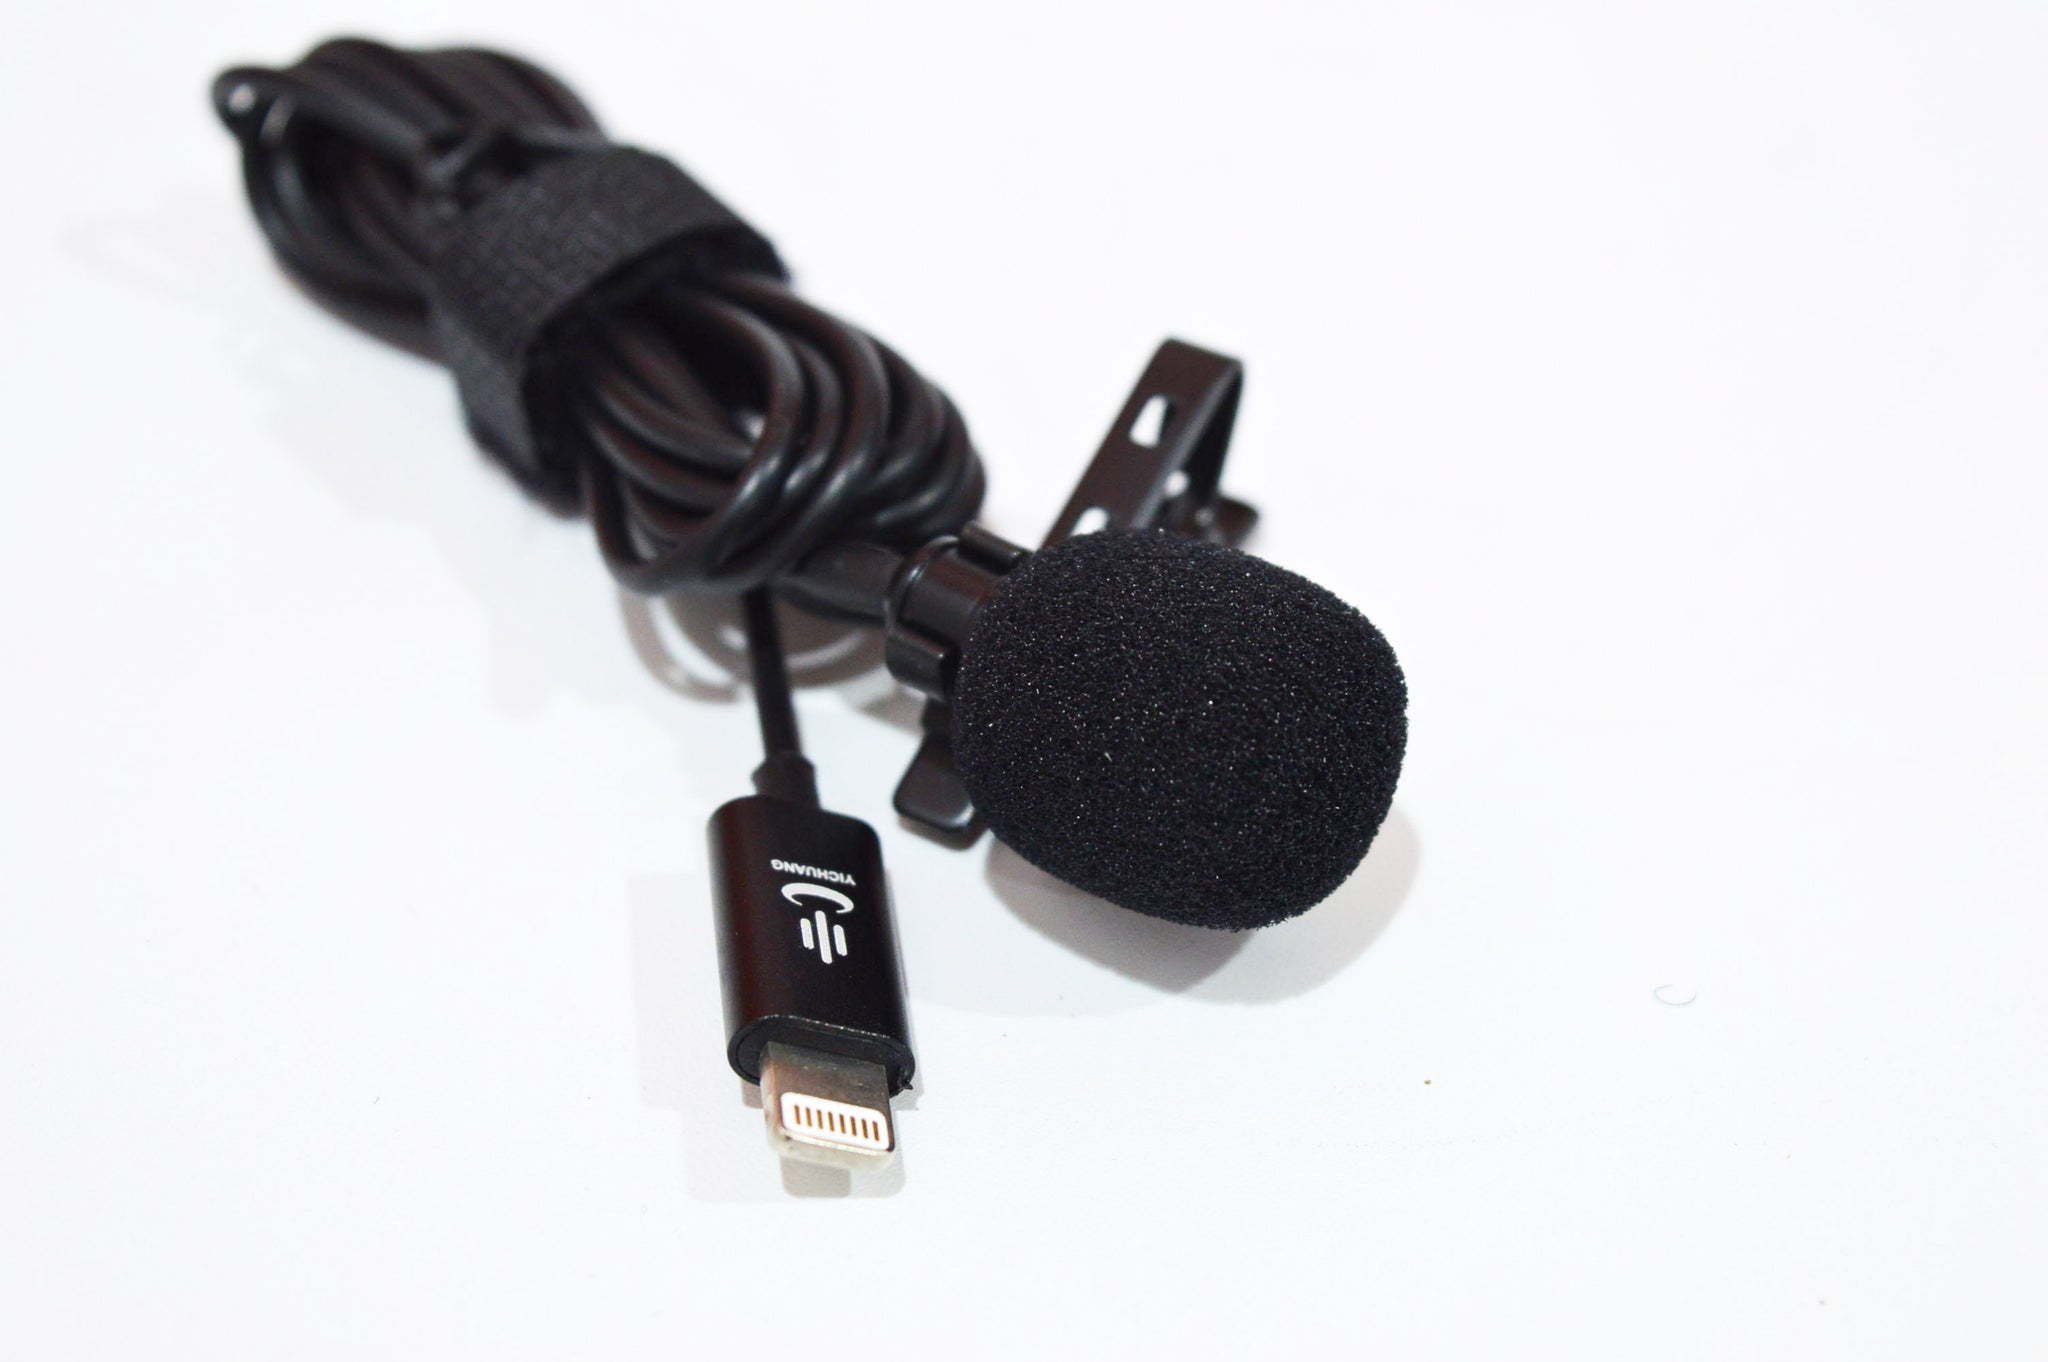 Yichuang YC-LM10 Microphone Clip On Lavalier for Iphone-1.5m